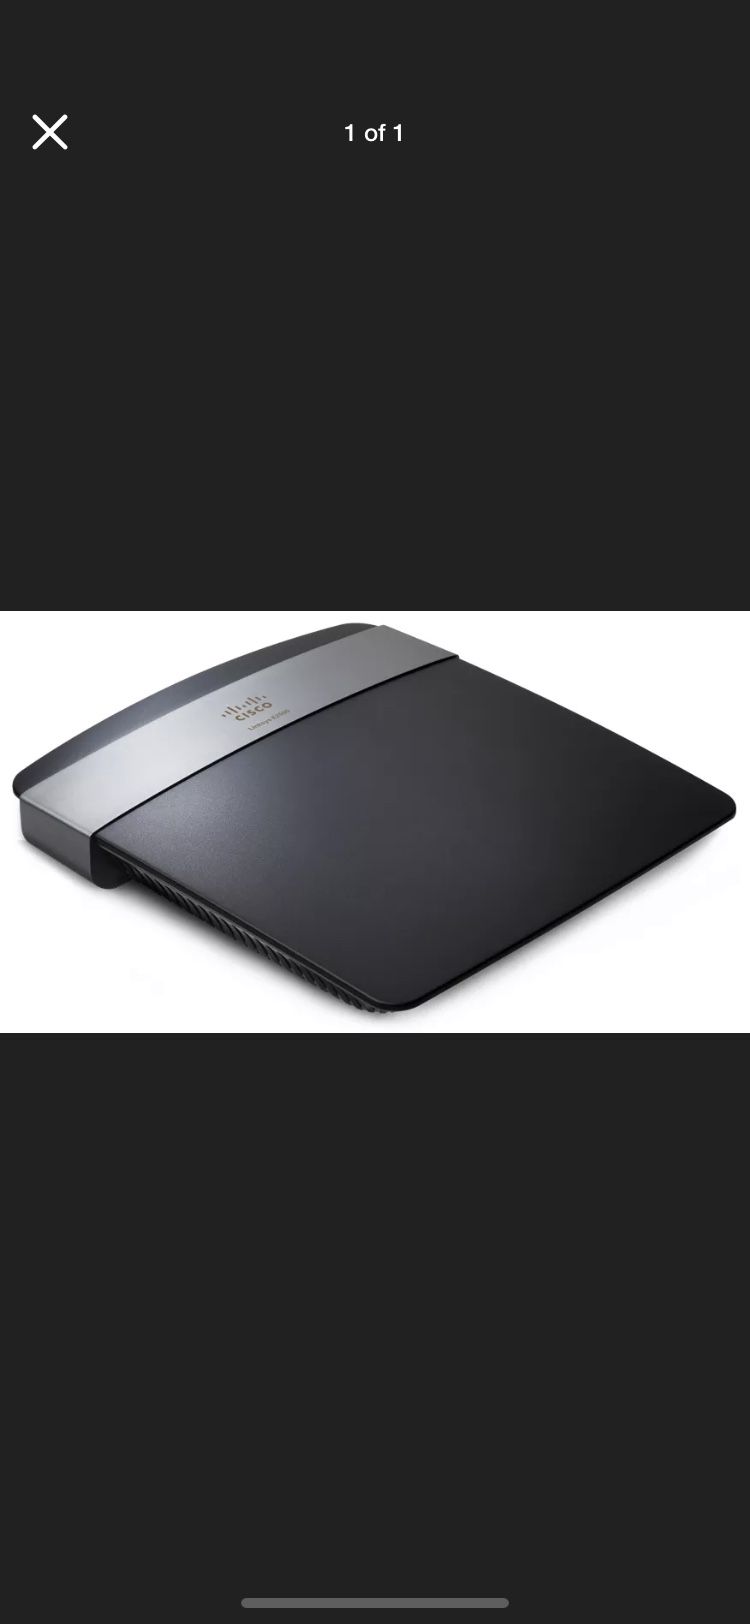 Linksys wi-if router N600